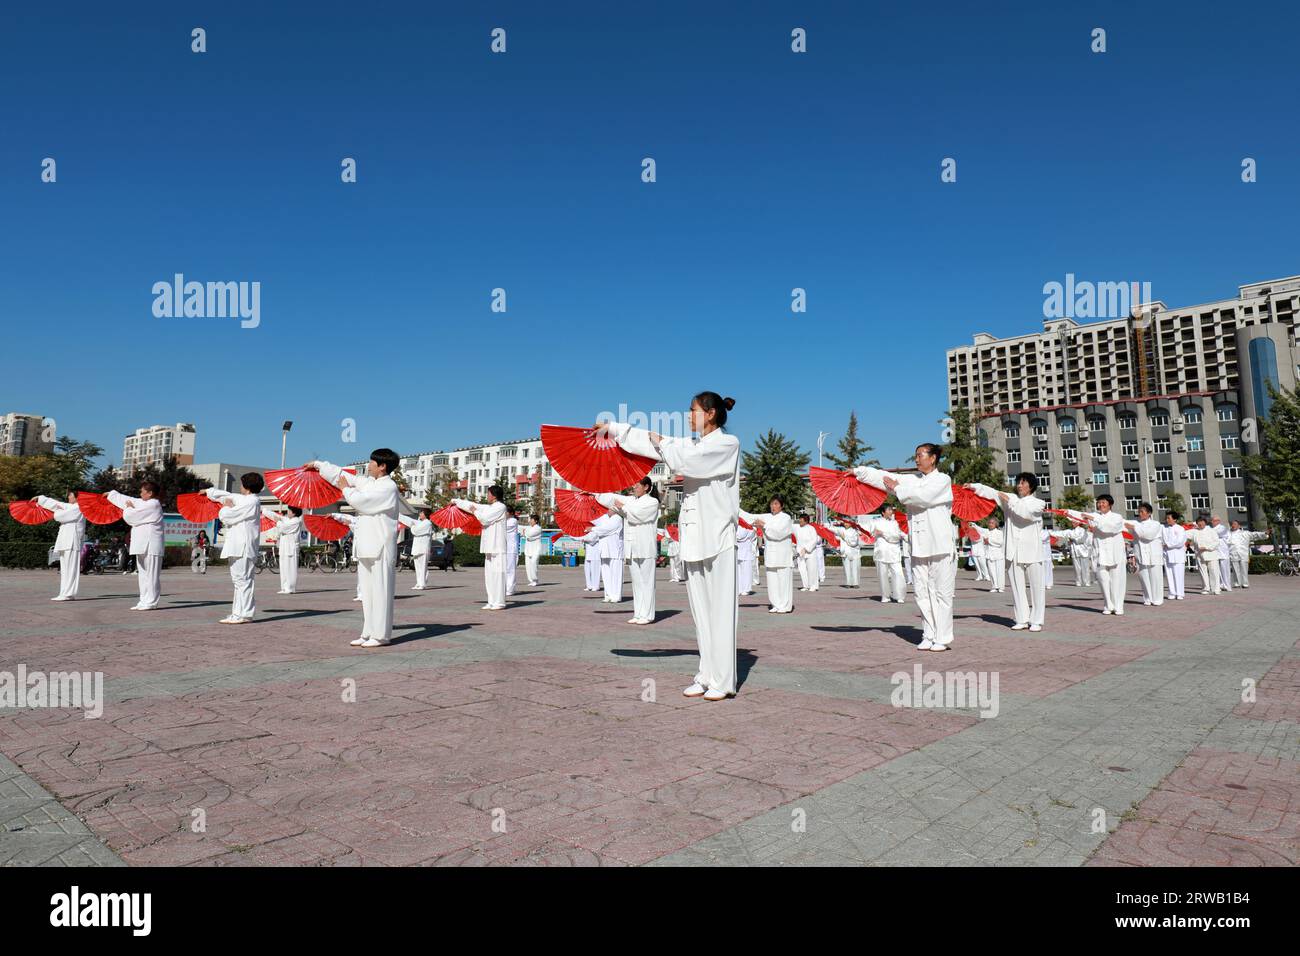 Luannan County, China - Oct. 8, 2019: Taiji Knife Show in Square, Luannan County, Hebei Province, China Stock Photo